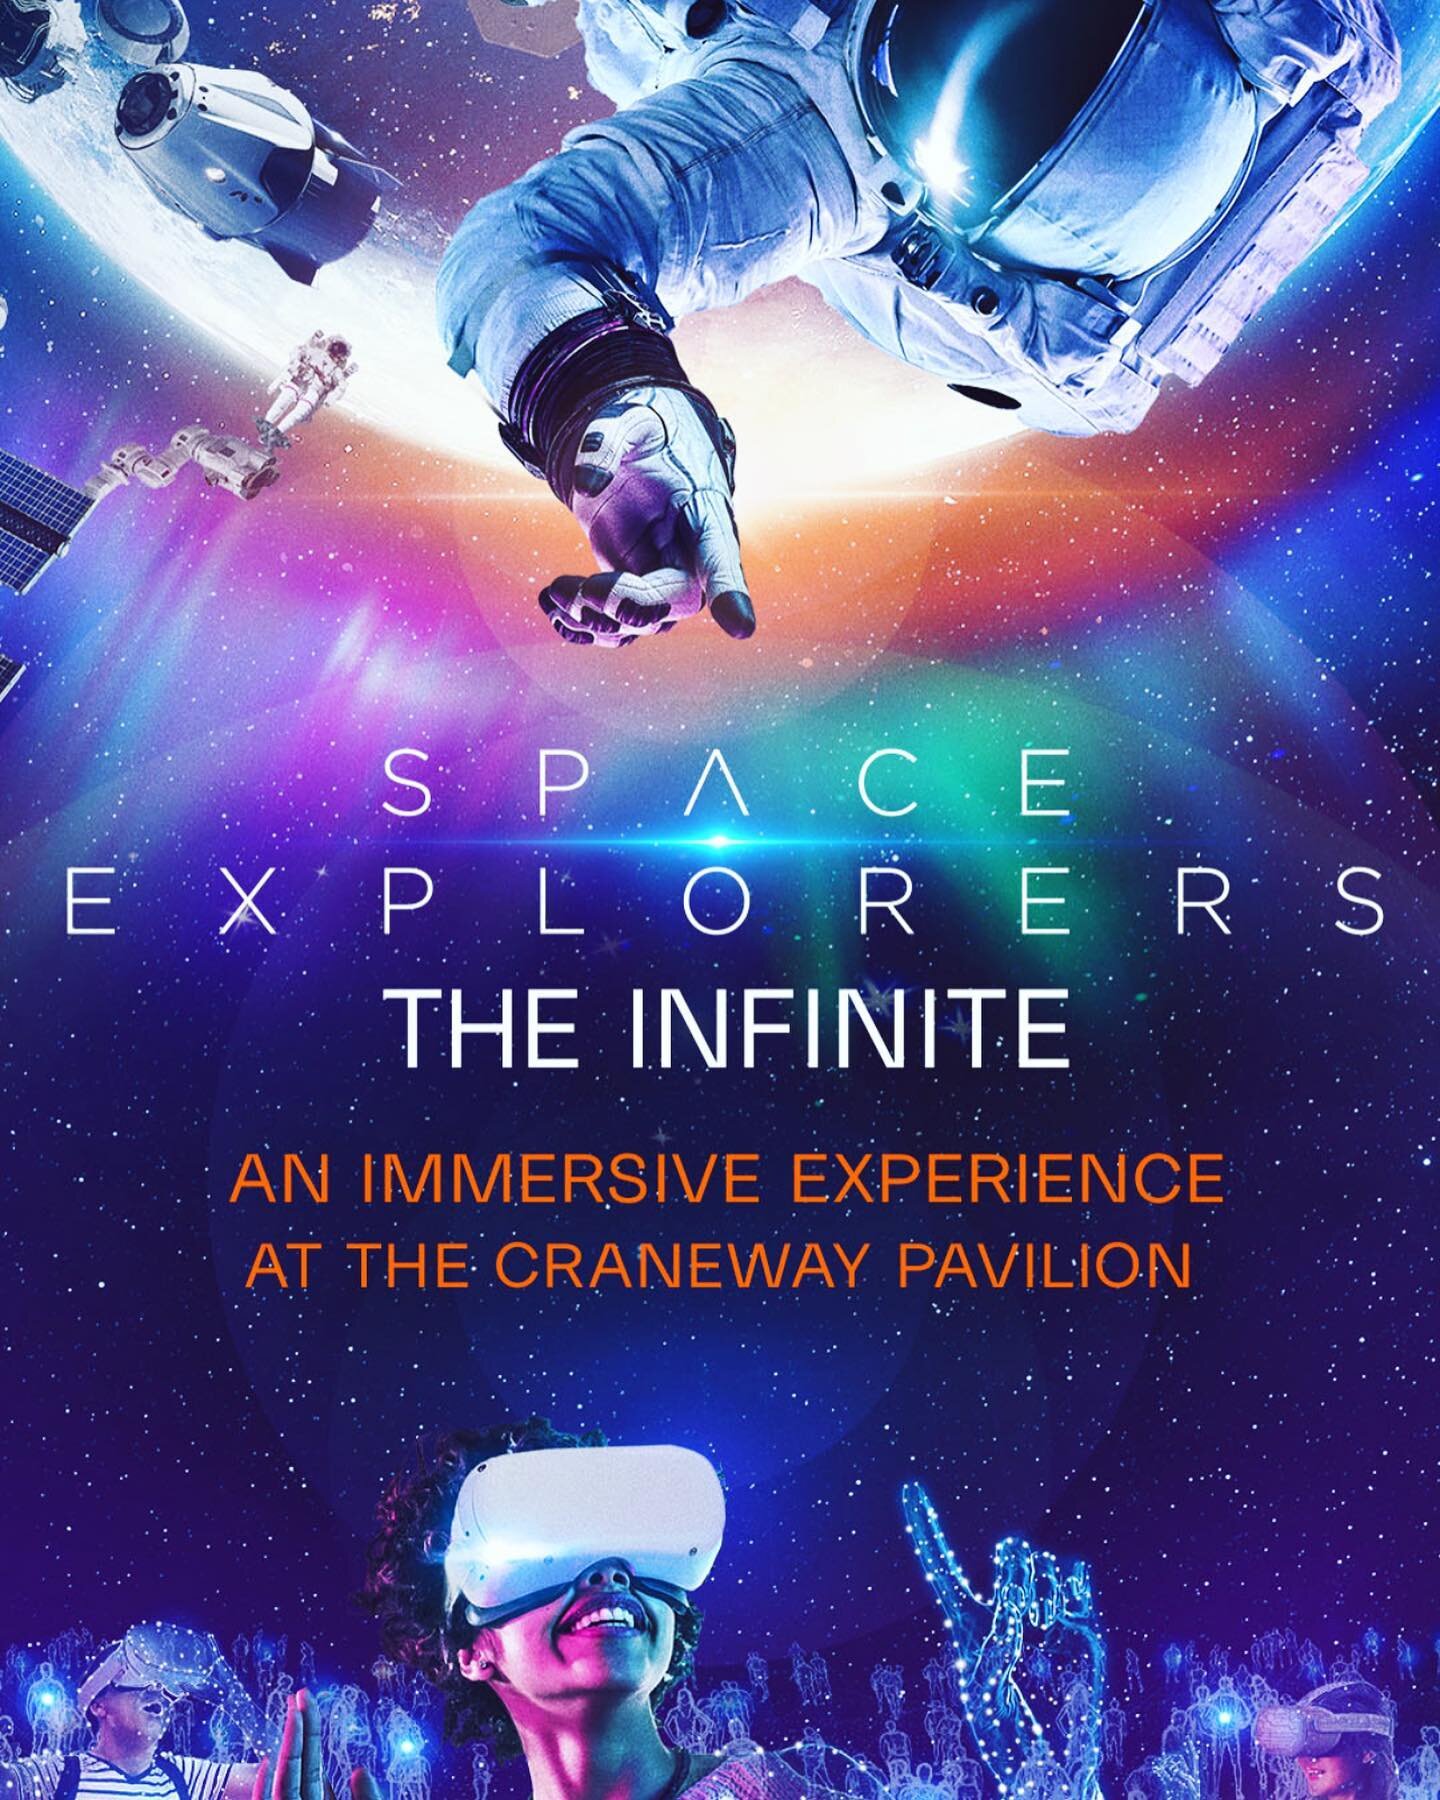 New experience coming to the @cranewaypavilion 

@spaceexplorers.theinfinite